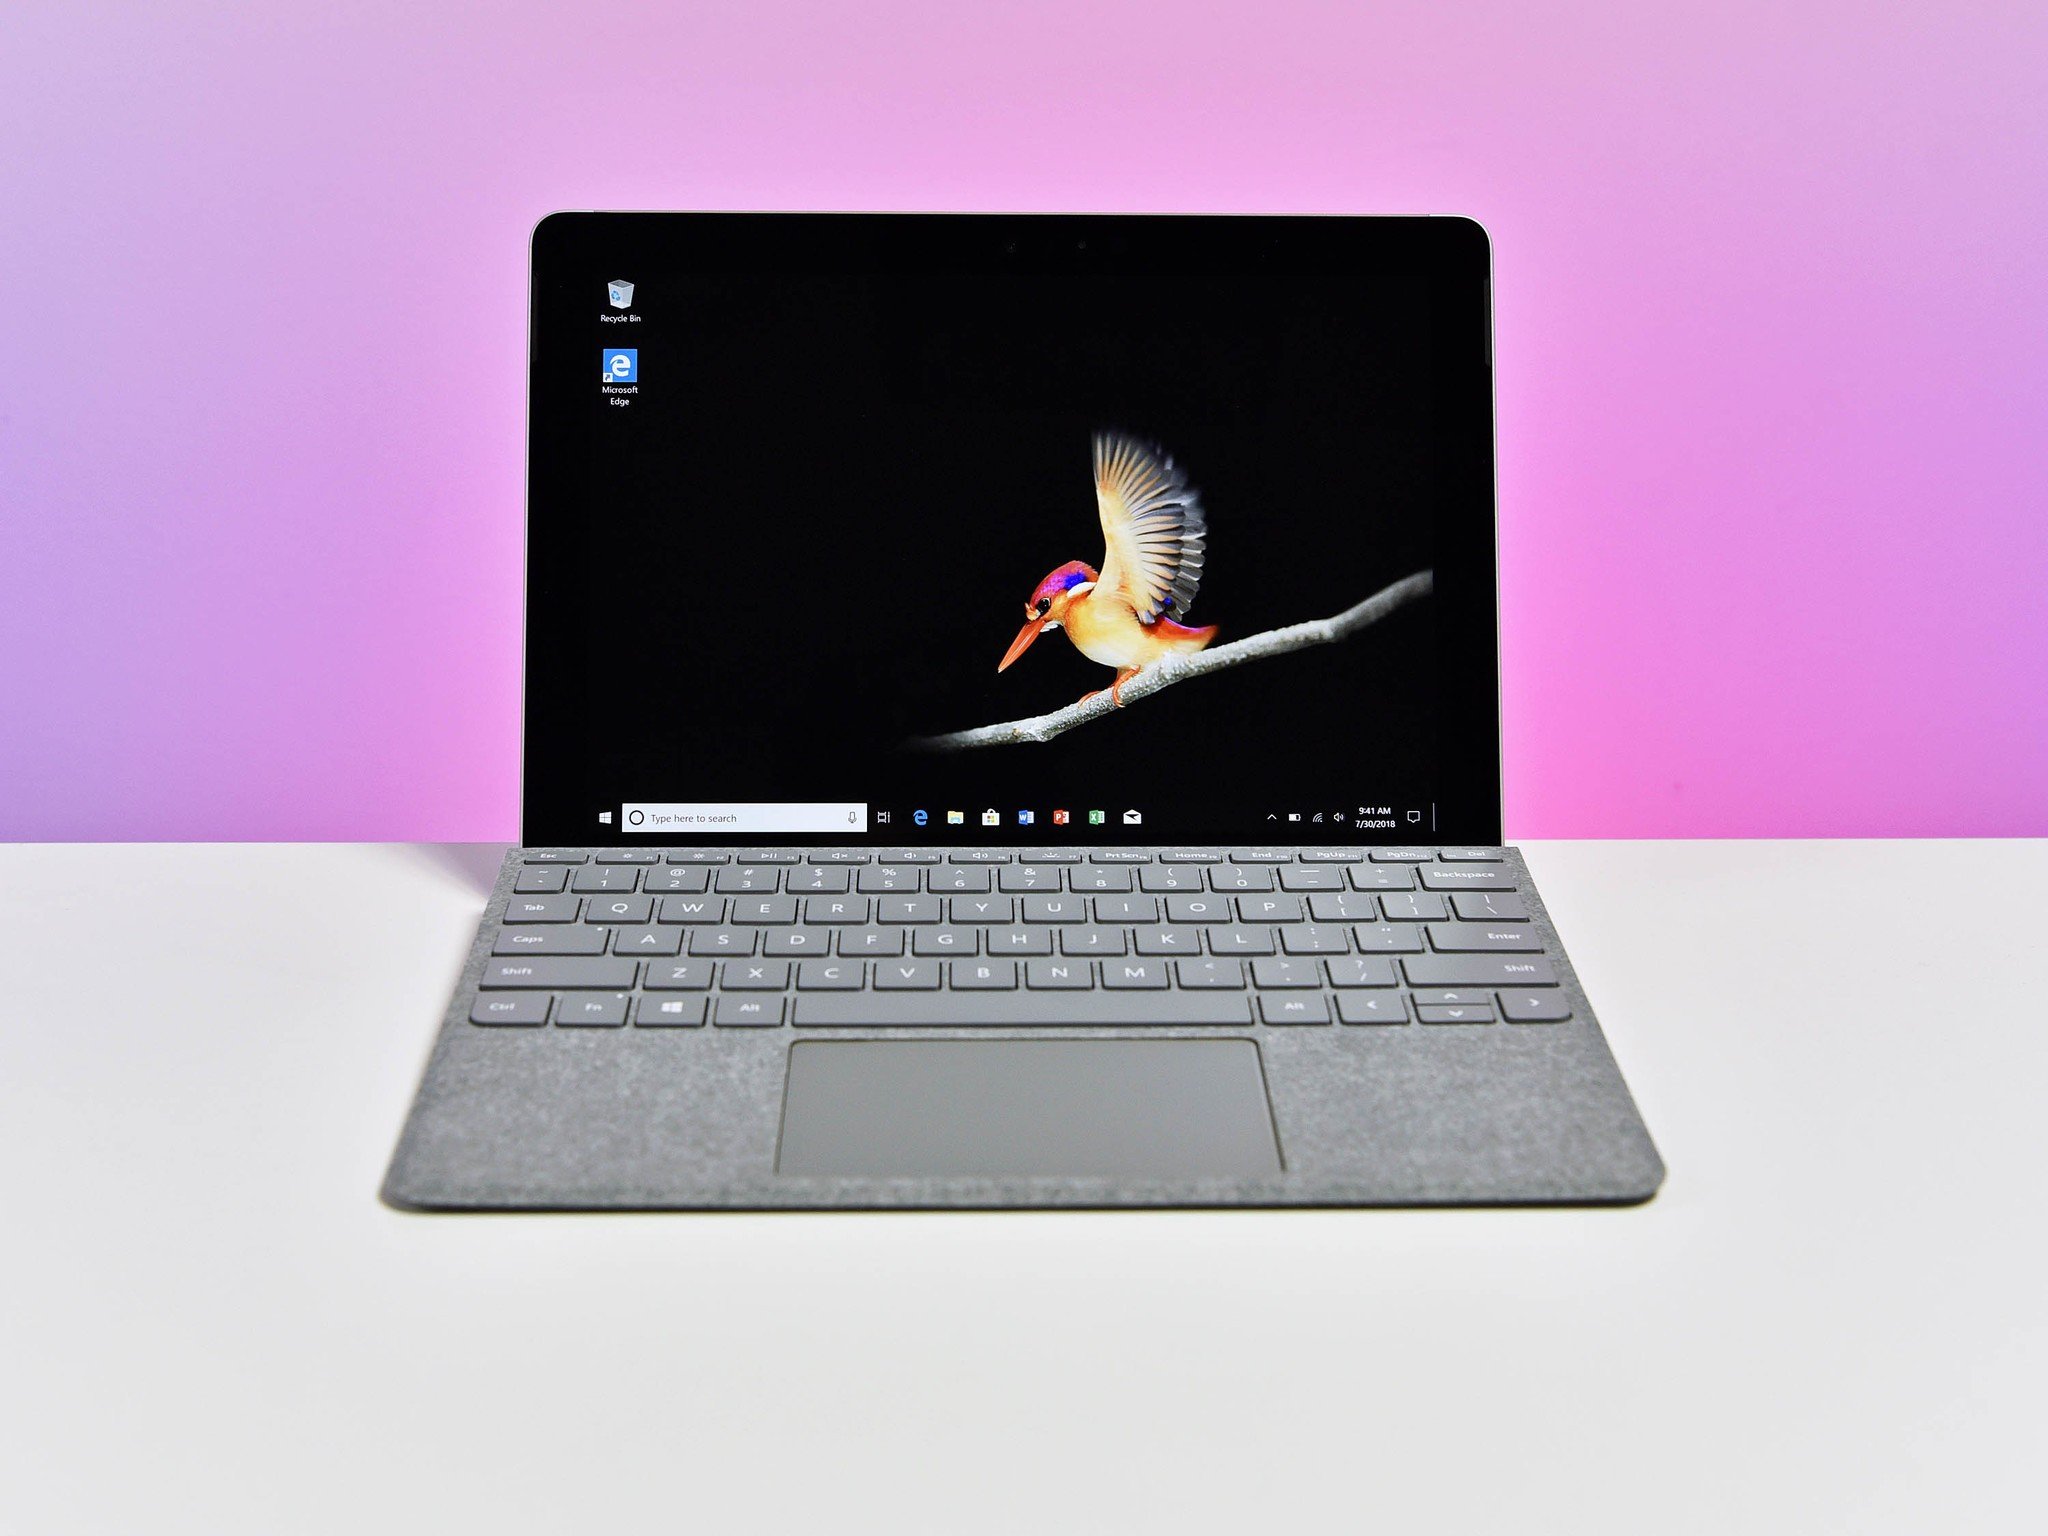 Surface Go now available in the U.S. and Canada